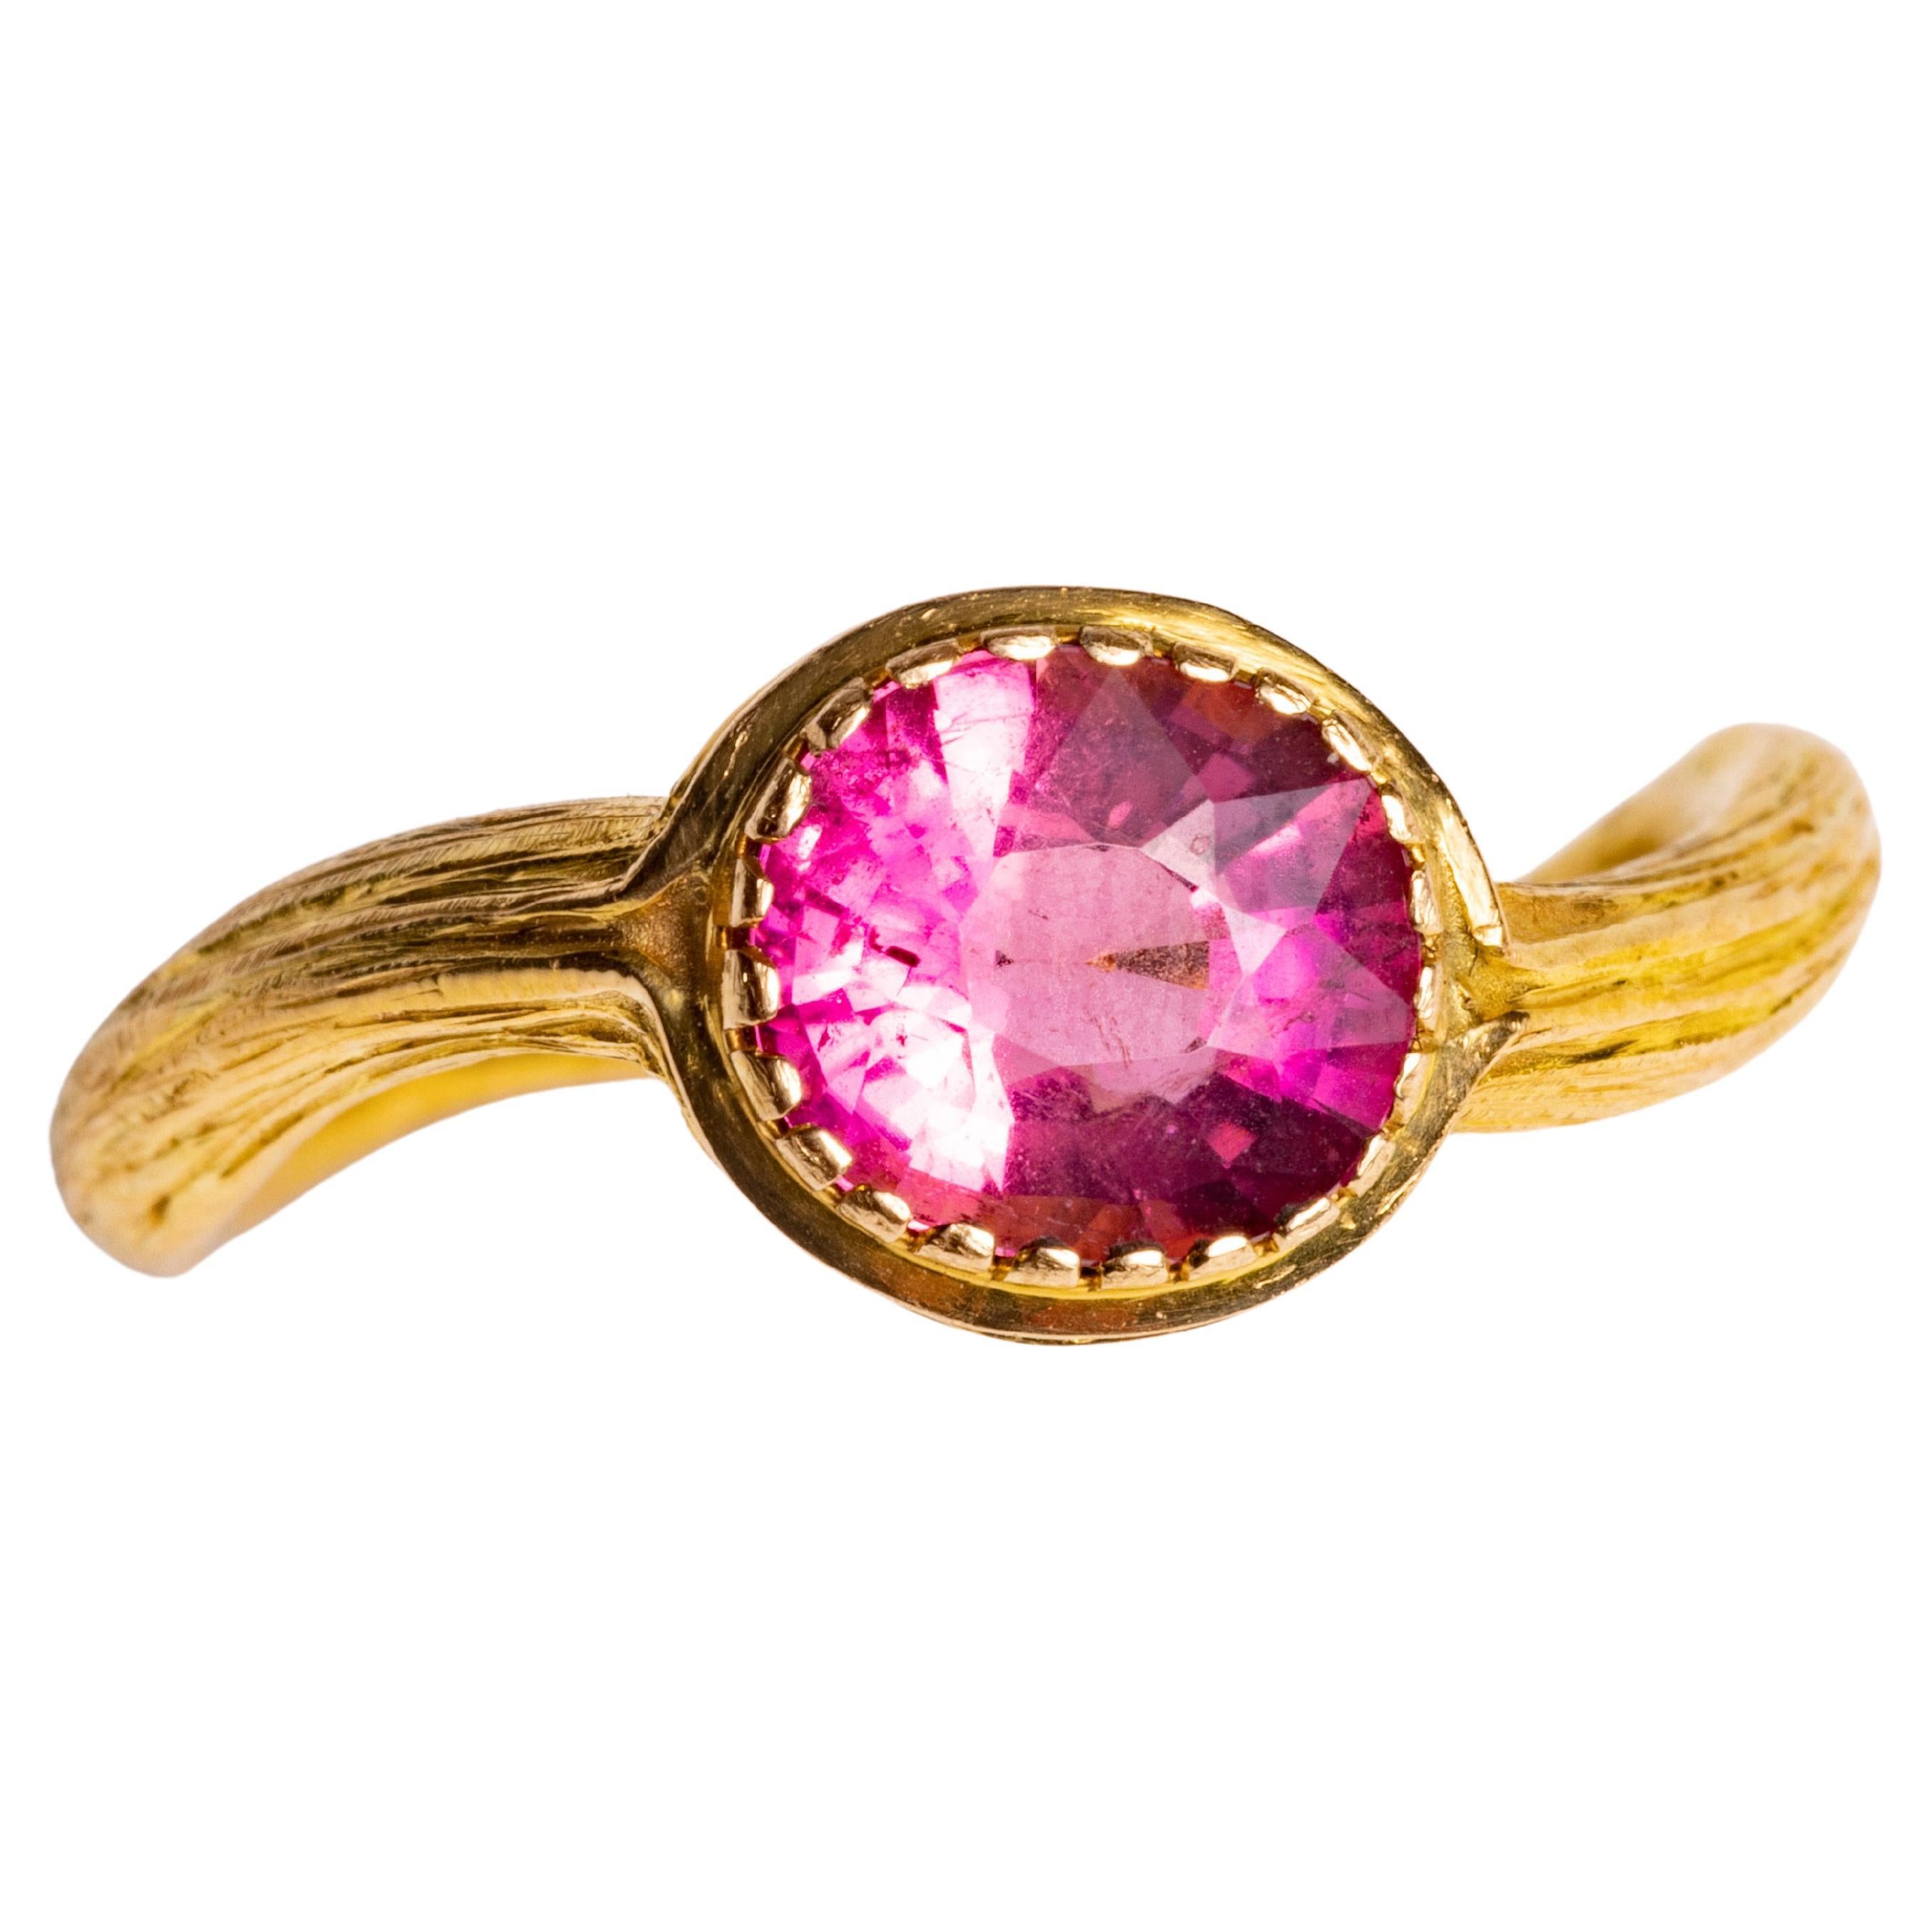 A 22K gold ring with textured tooling featuring a round, brilliant cut pink tourmaline in a bezel setting.  Gold band has a subtle serpentine shape to it.

The fine jewelry collection is sourced, designed or created by Deborah Lockhart Phillips.